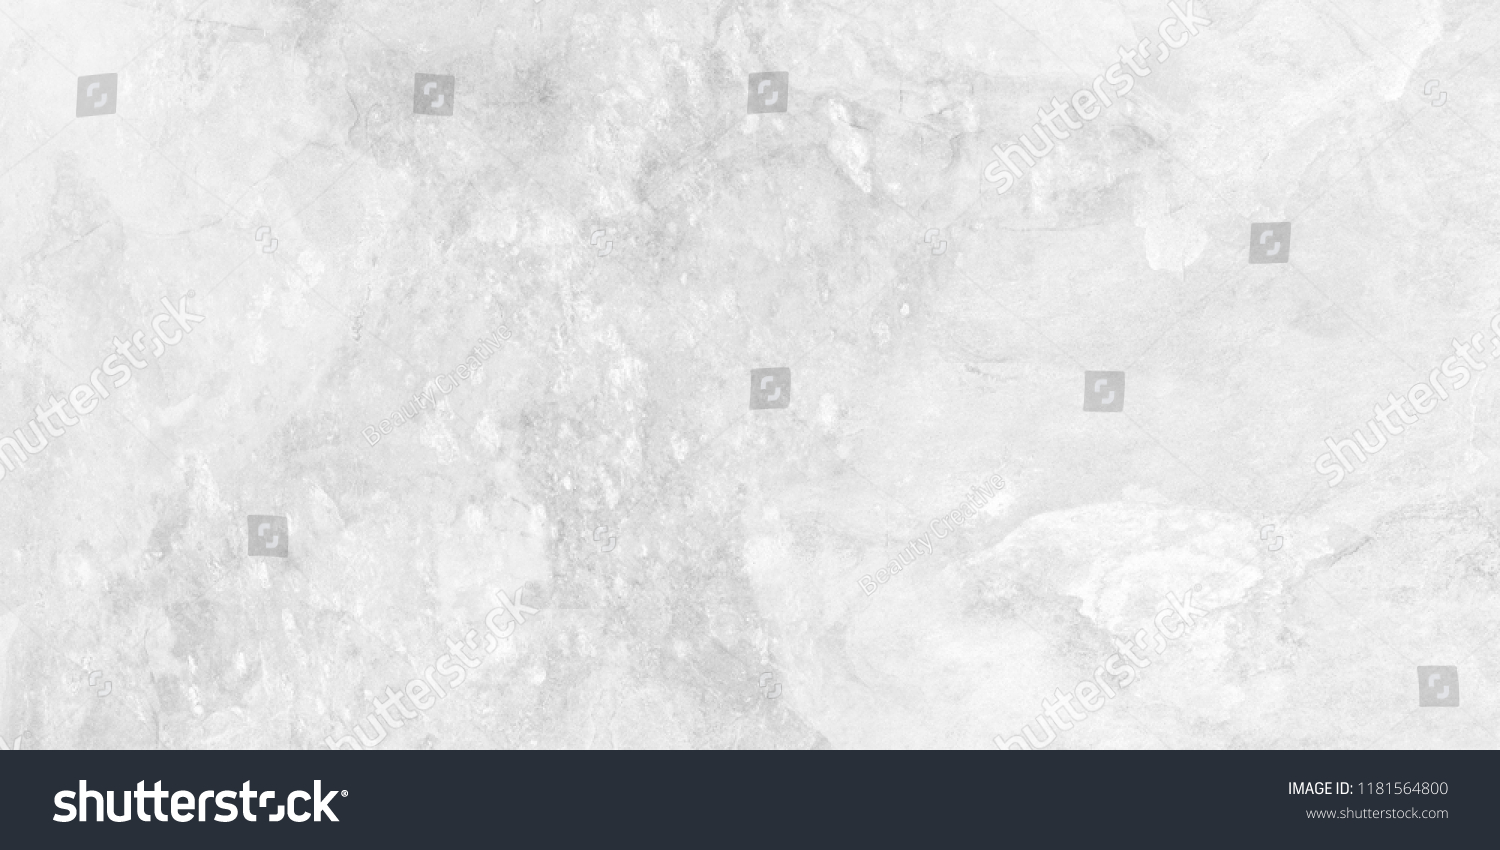 natural structure of abstract marble  white(gray) ink acrylic painted waves texture. Pattern used for background, interiors, skin tile luxurious design, wallpaper or home floor tiles #1181564800